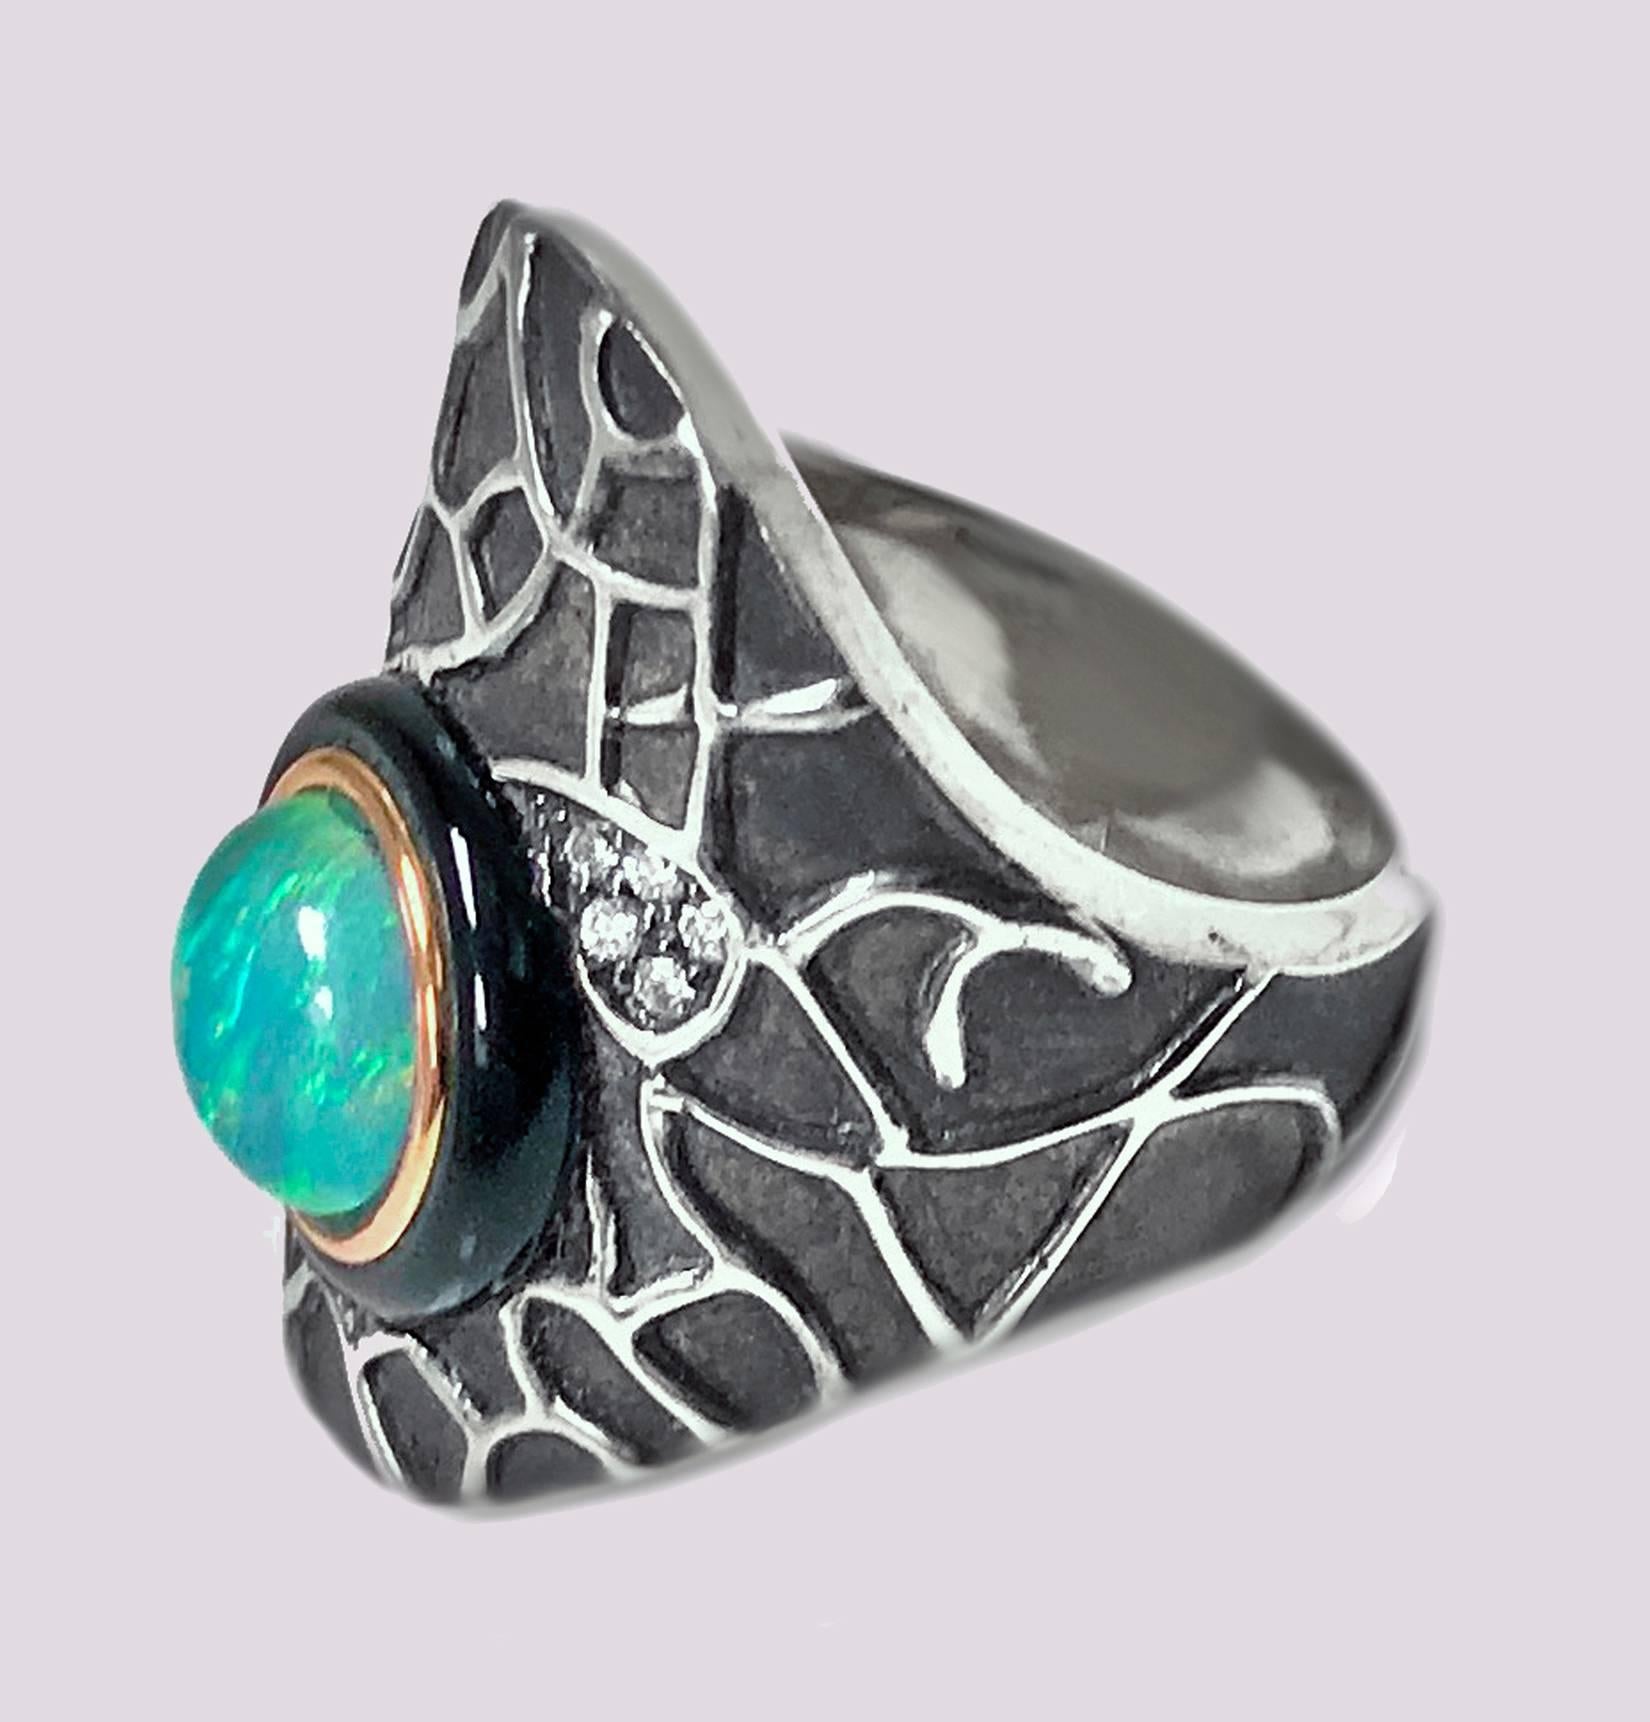 Diamond Opal Onyx Silver and Gold Ring, custom made. The of an asymmetrical shape, 18K gold bezel offset with a round opal, approximately 8.00mm, good play of colour, with outer black onyx surround. The mount of oxidised silver with applied polished